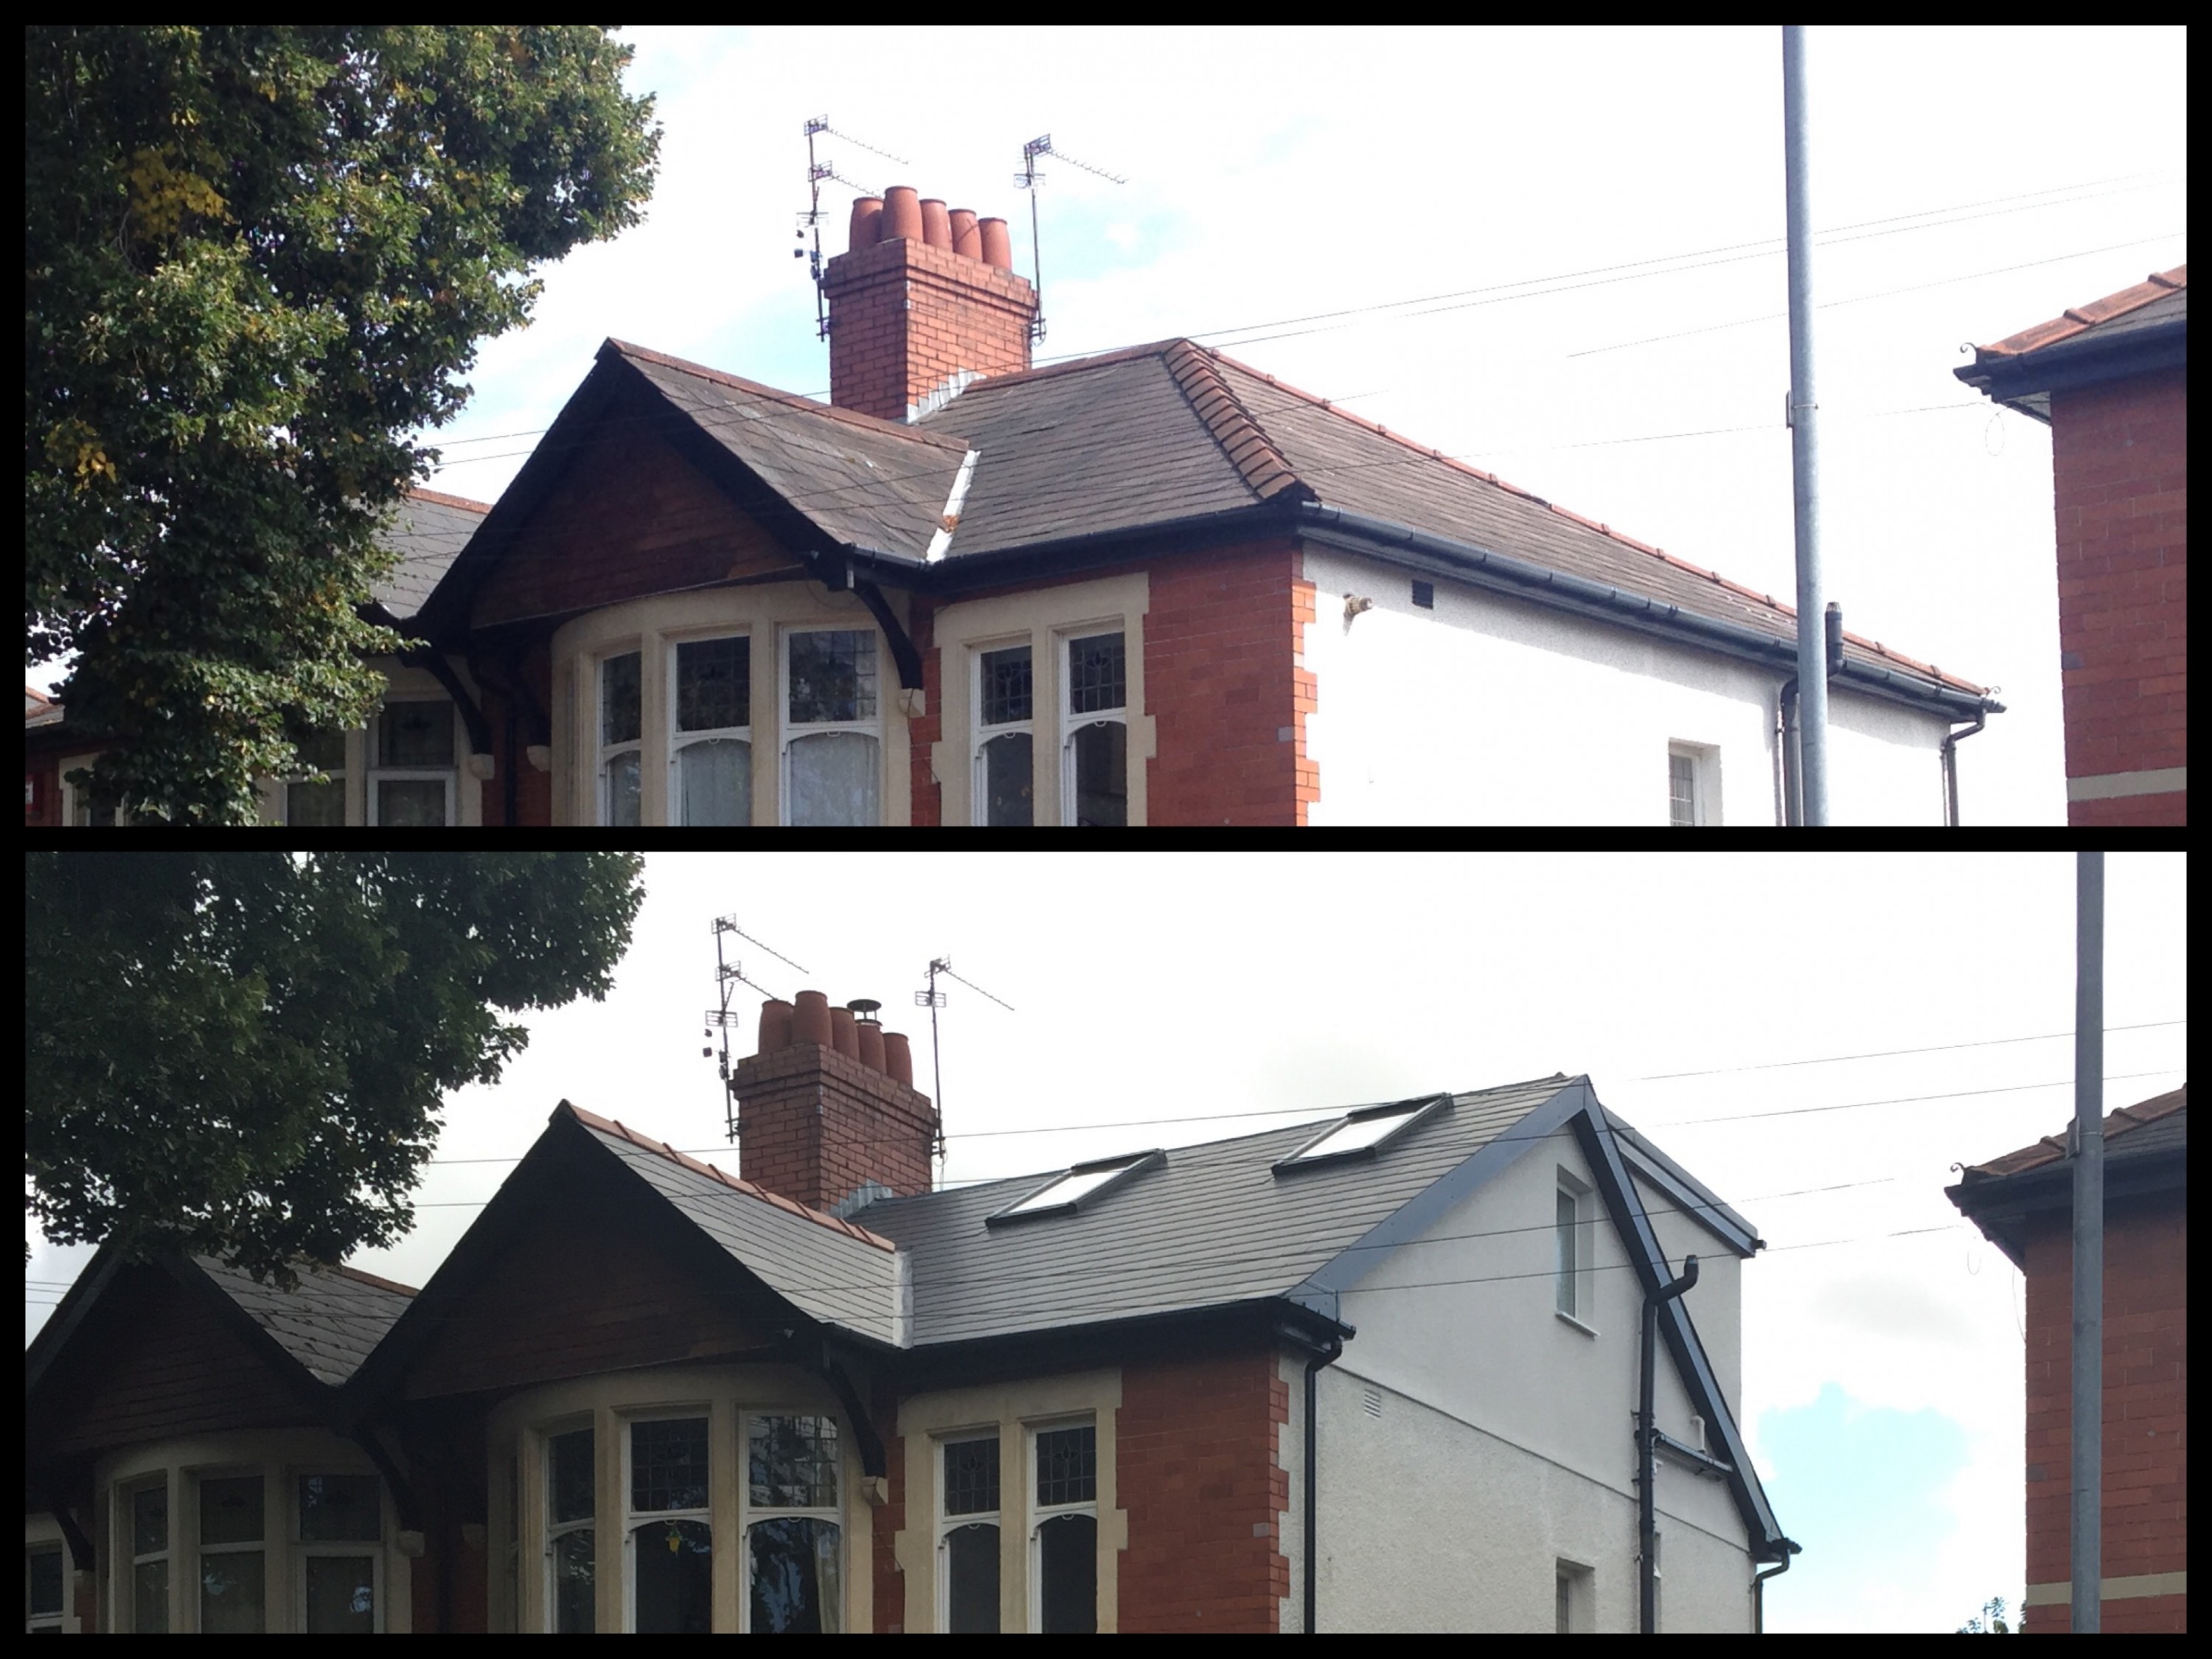 Roofline before and after showing hip to gable conversion, dormer, velux windows and new roof finish